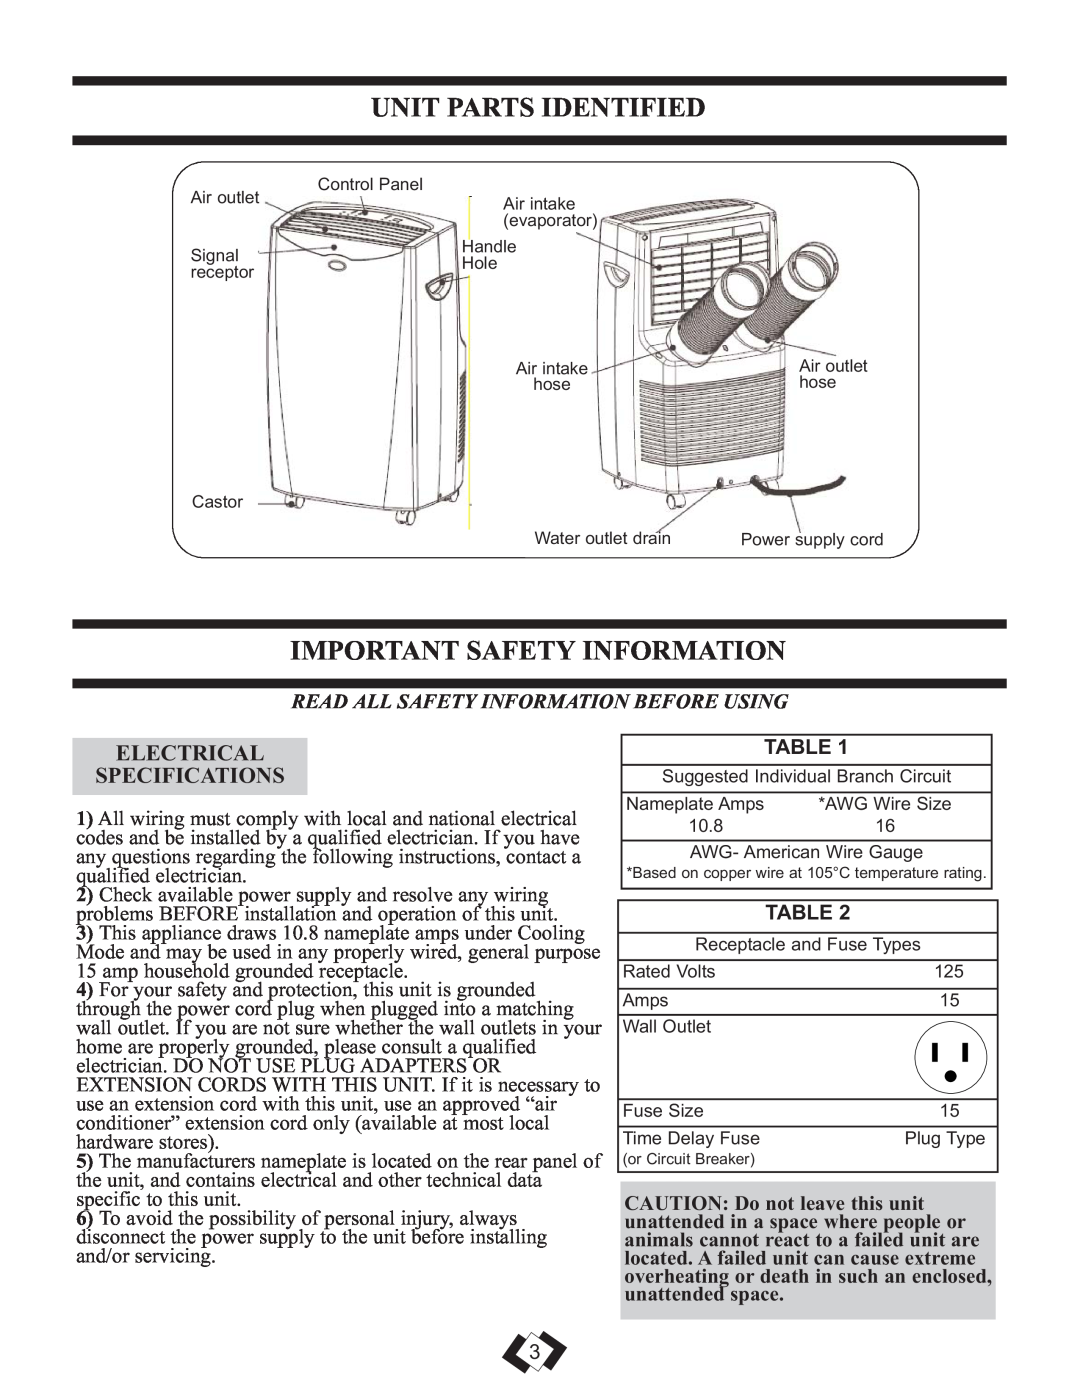 Danby DPAC 12099 operating instructions Unit Parts Identified, Important Safety Information, Electrical Specifications 